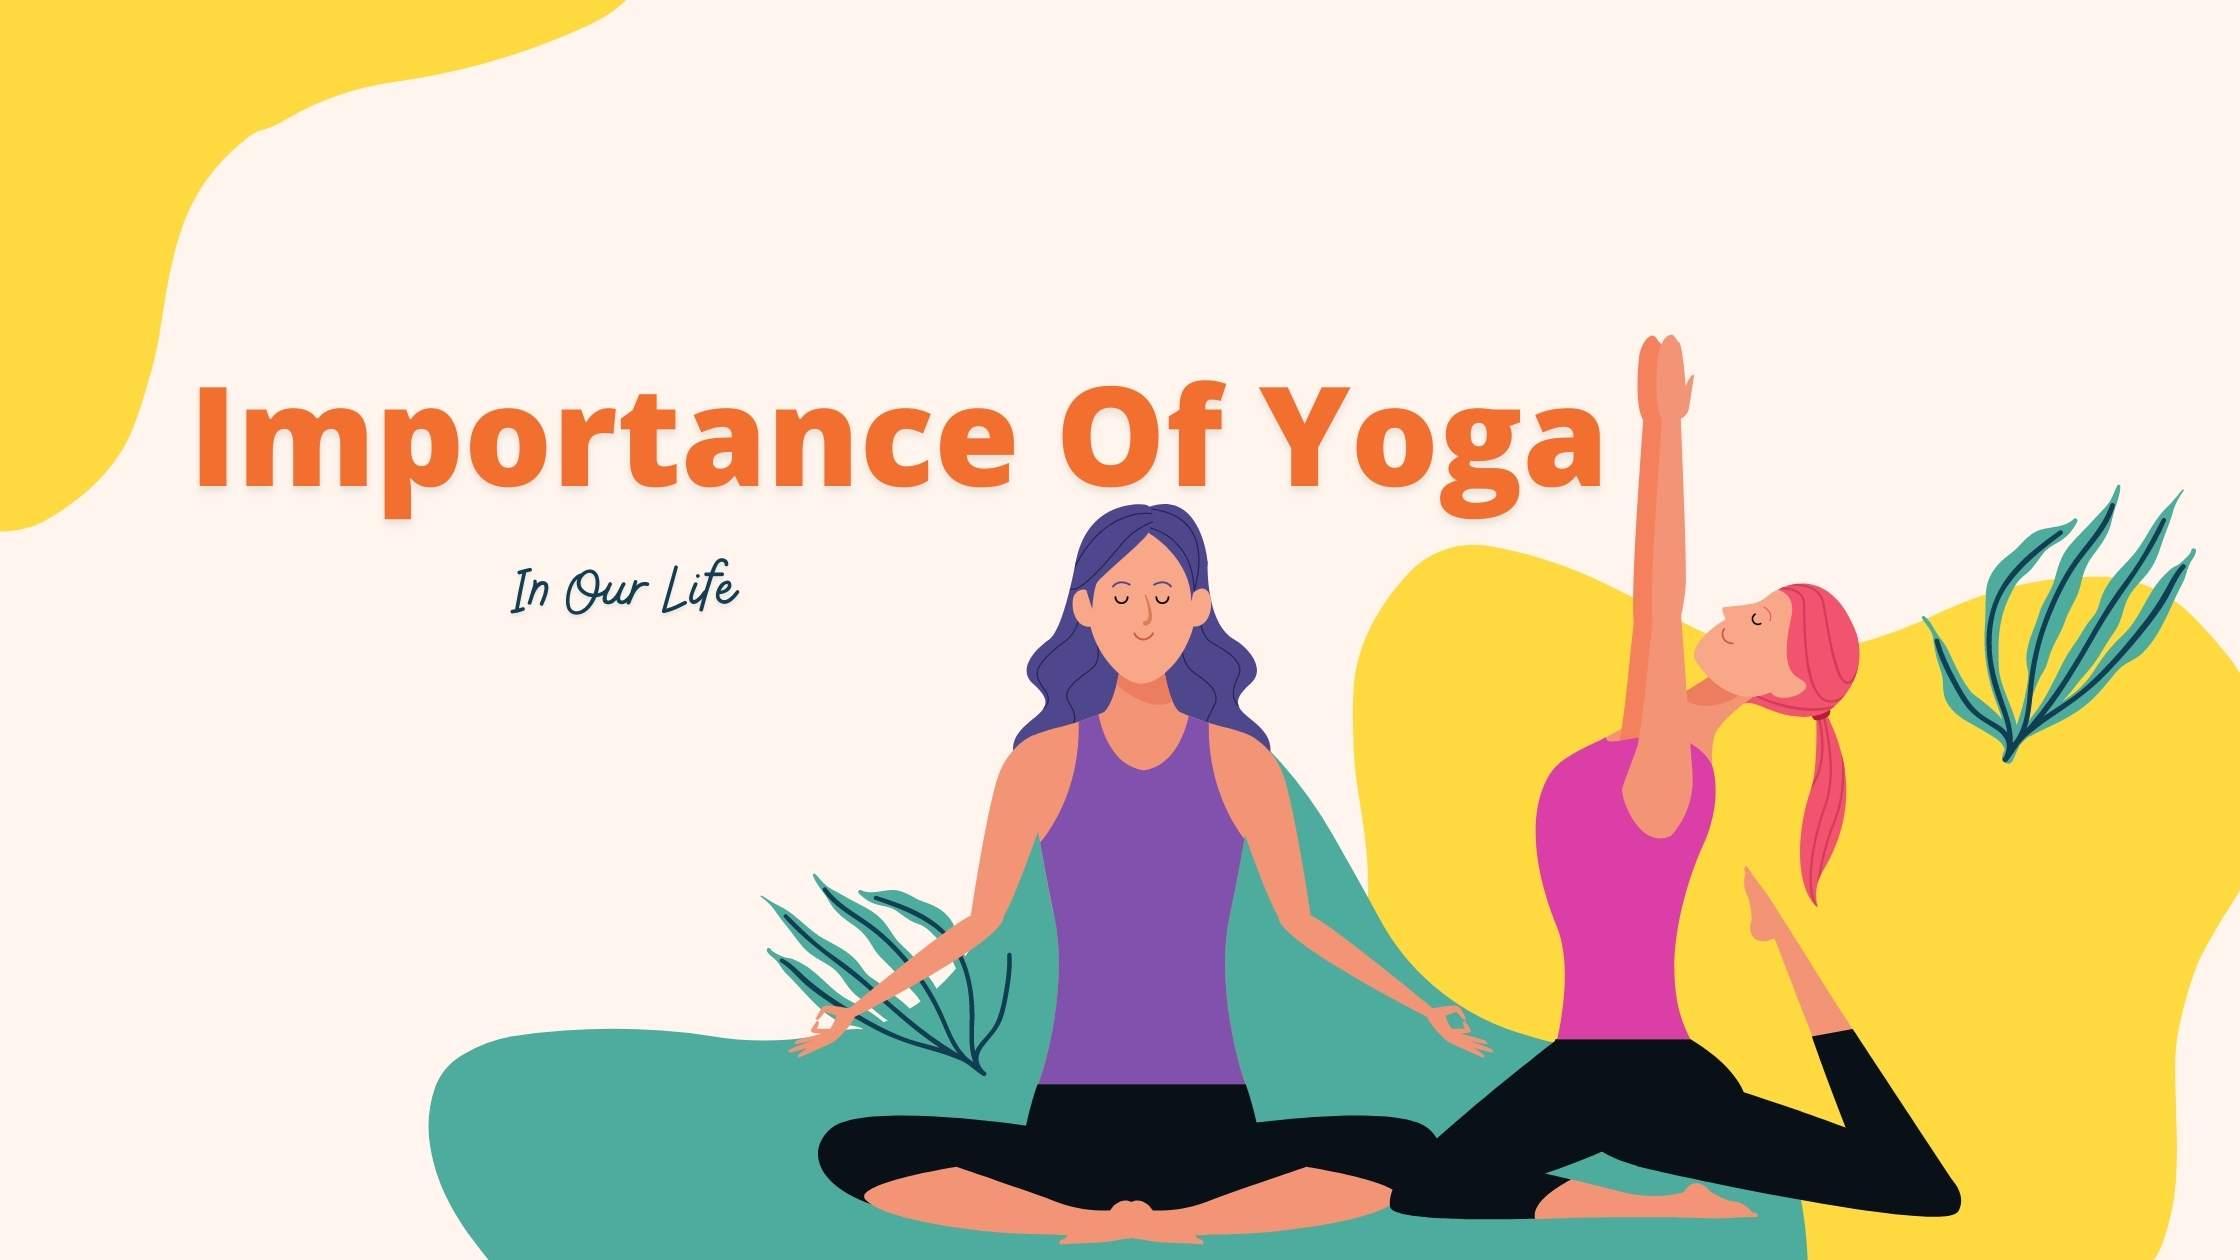 4 Popular Yoga Poses And The Meaning Behind Them - DoYou